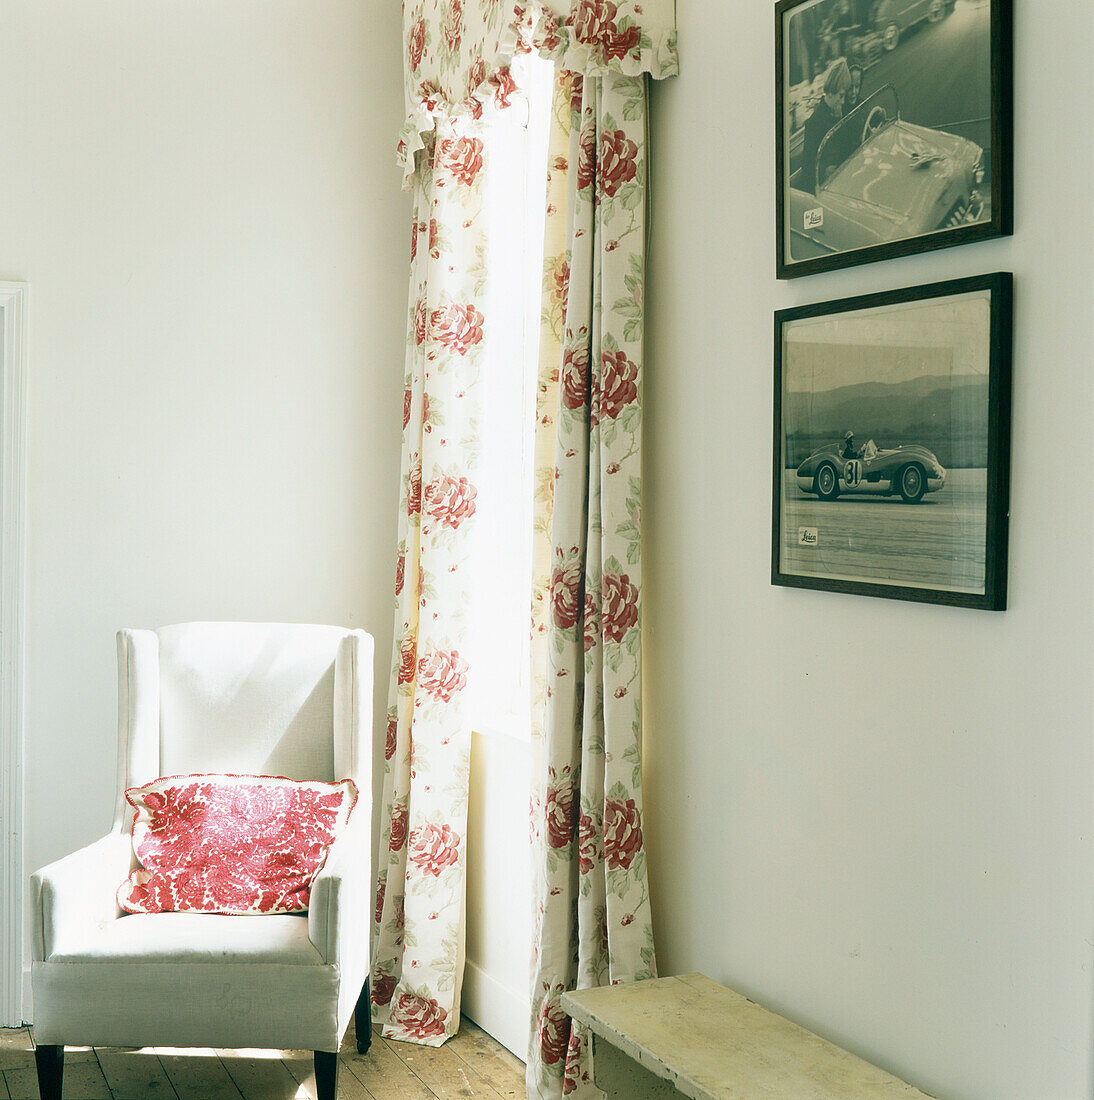 Armchair and floral curtains